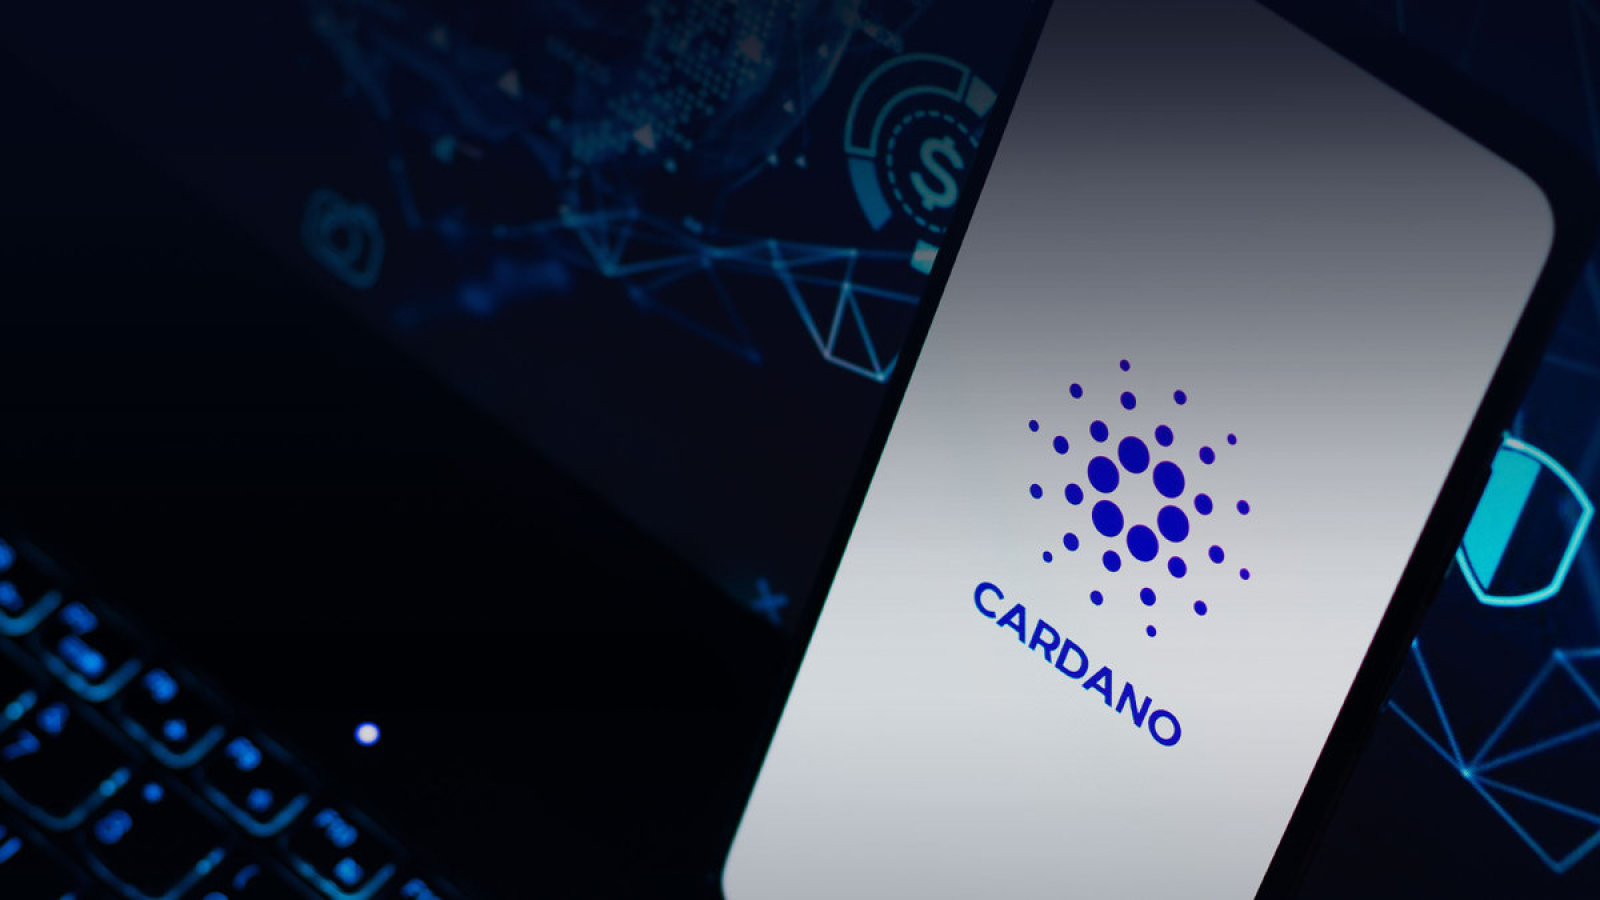 Cardano 'ghost chain' outperforms top blockchains in NFT market